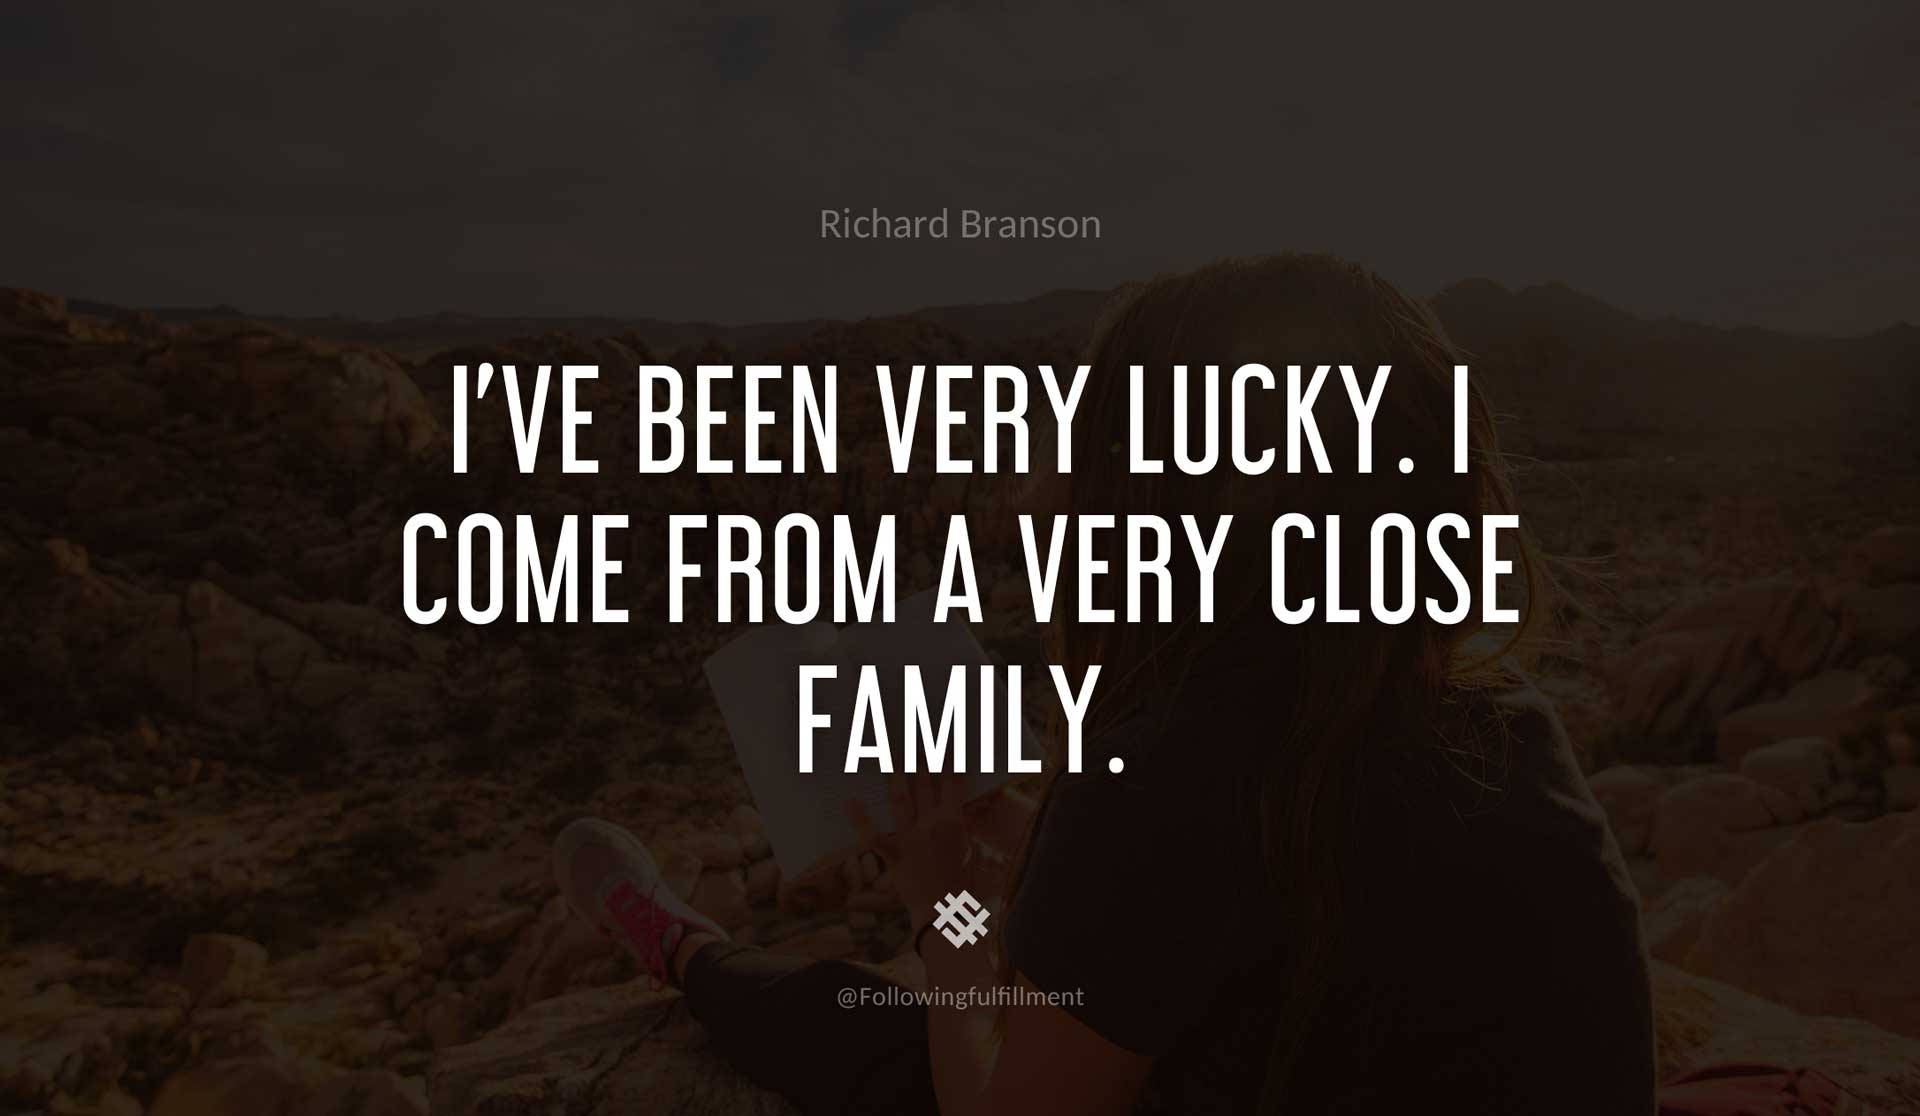 I've-been-very-lucky.-I-come-from-a-very-close-family.-RICHARD-BRANSON-Quote.jpg